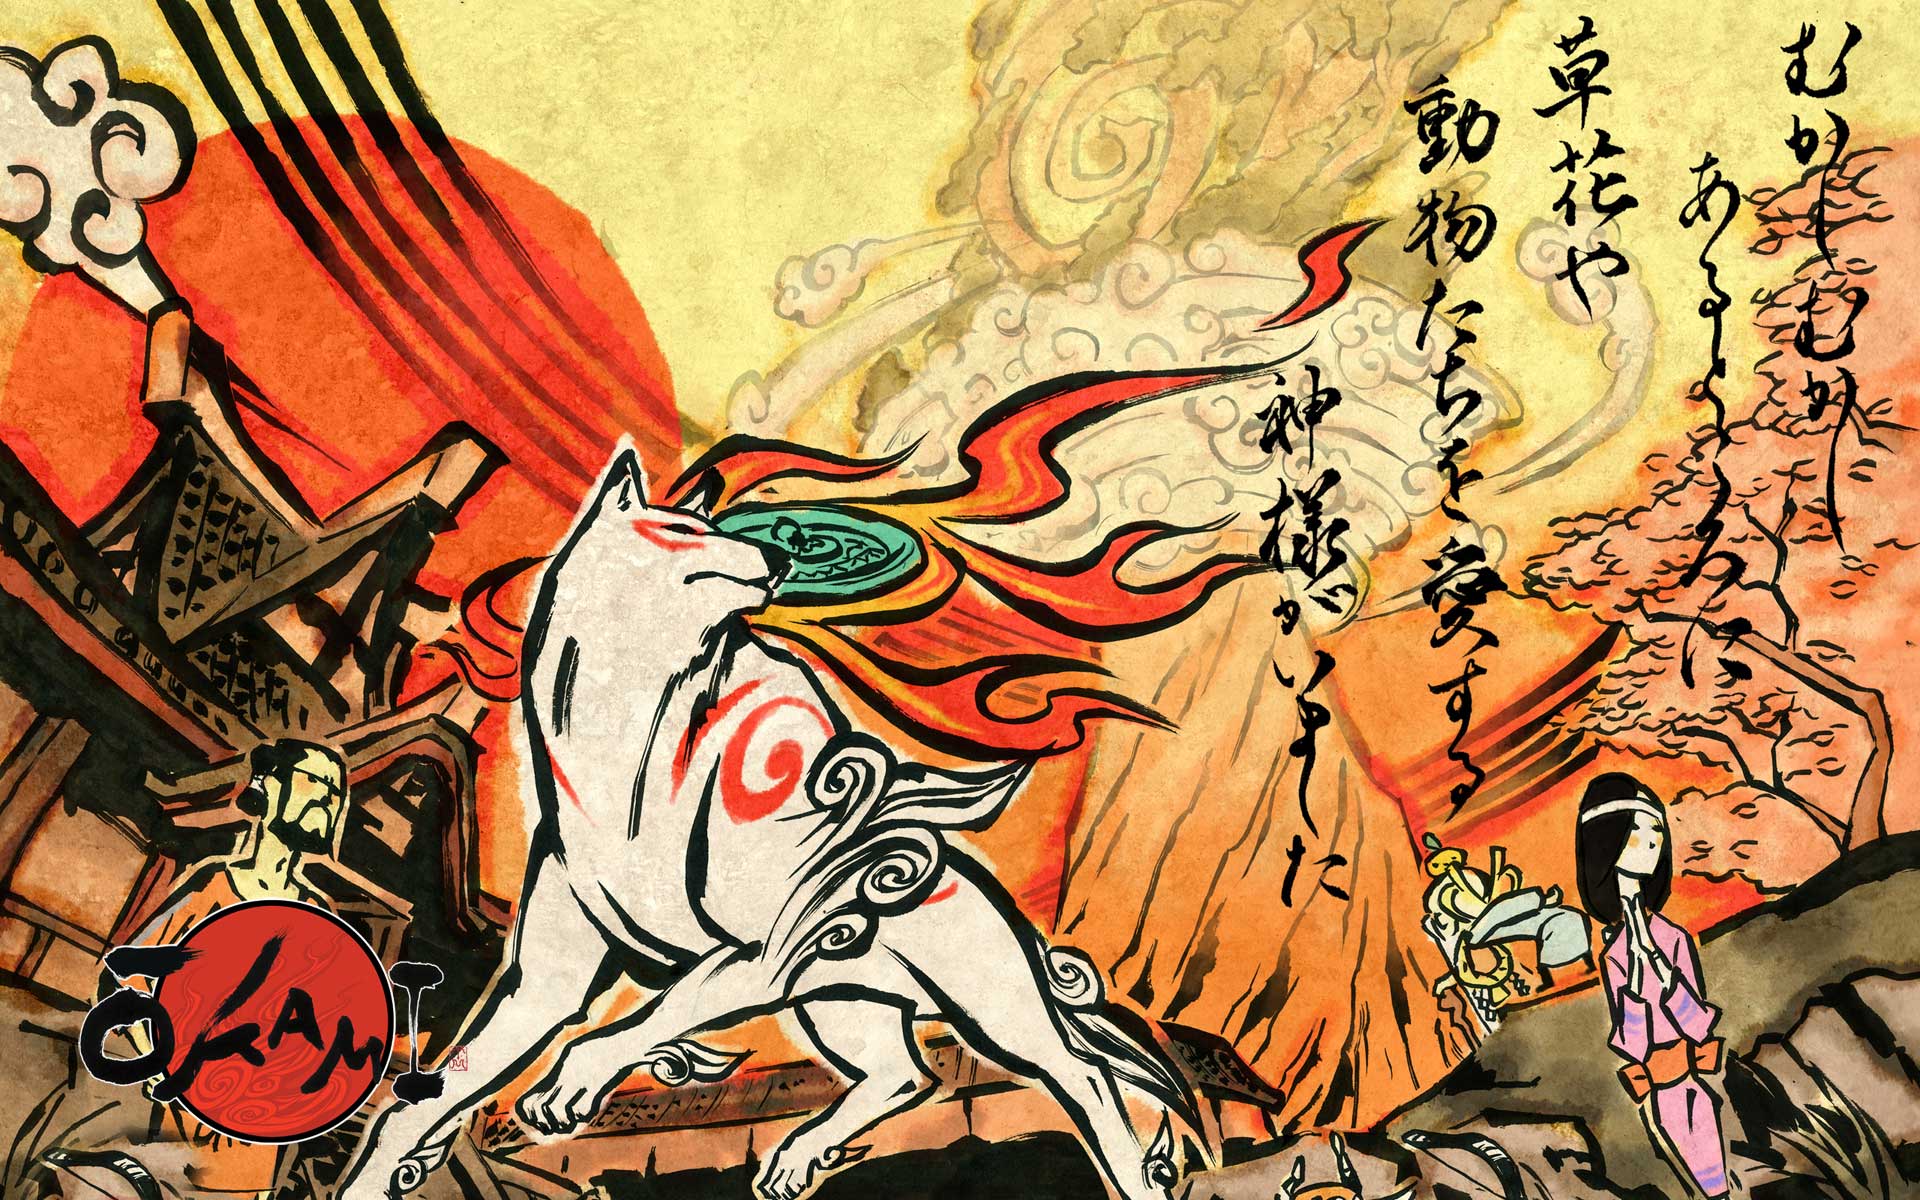 [Rumor] Okami HD rated on PS4, One and PC. Soma rated on One